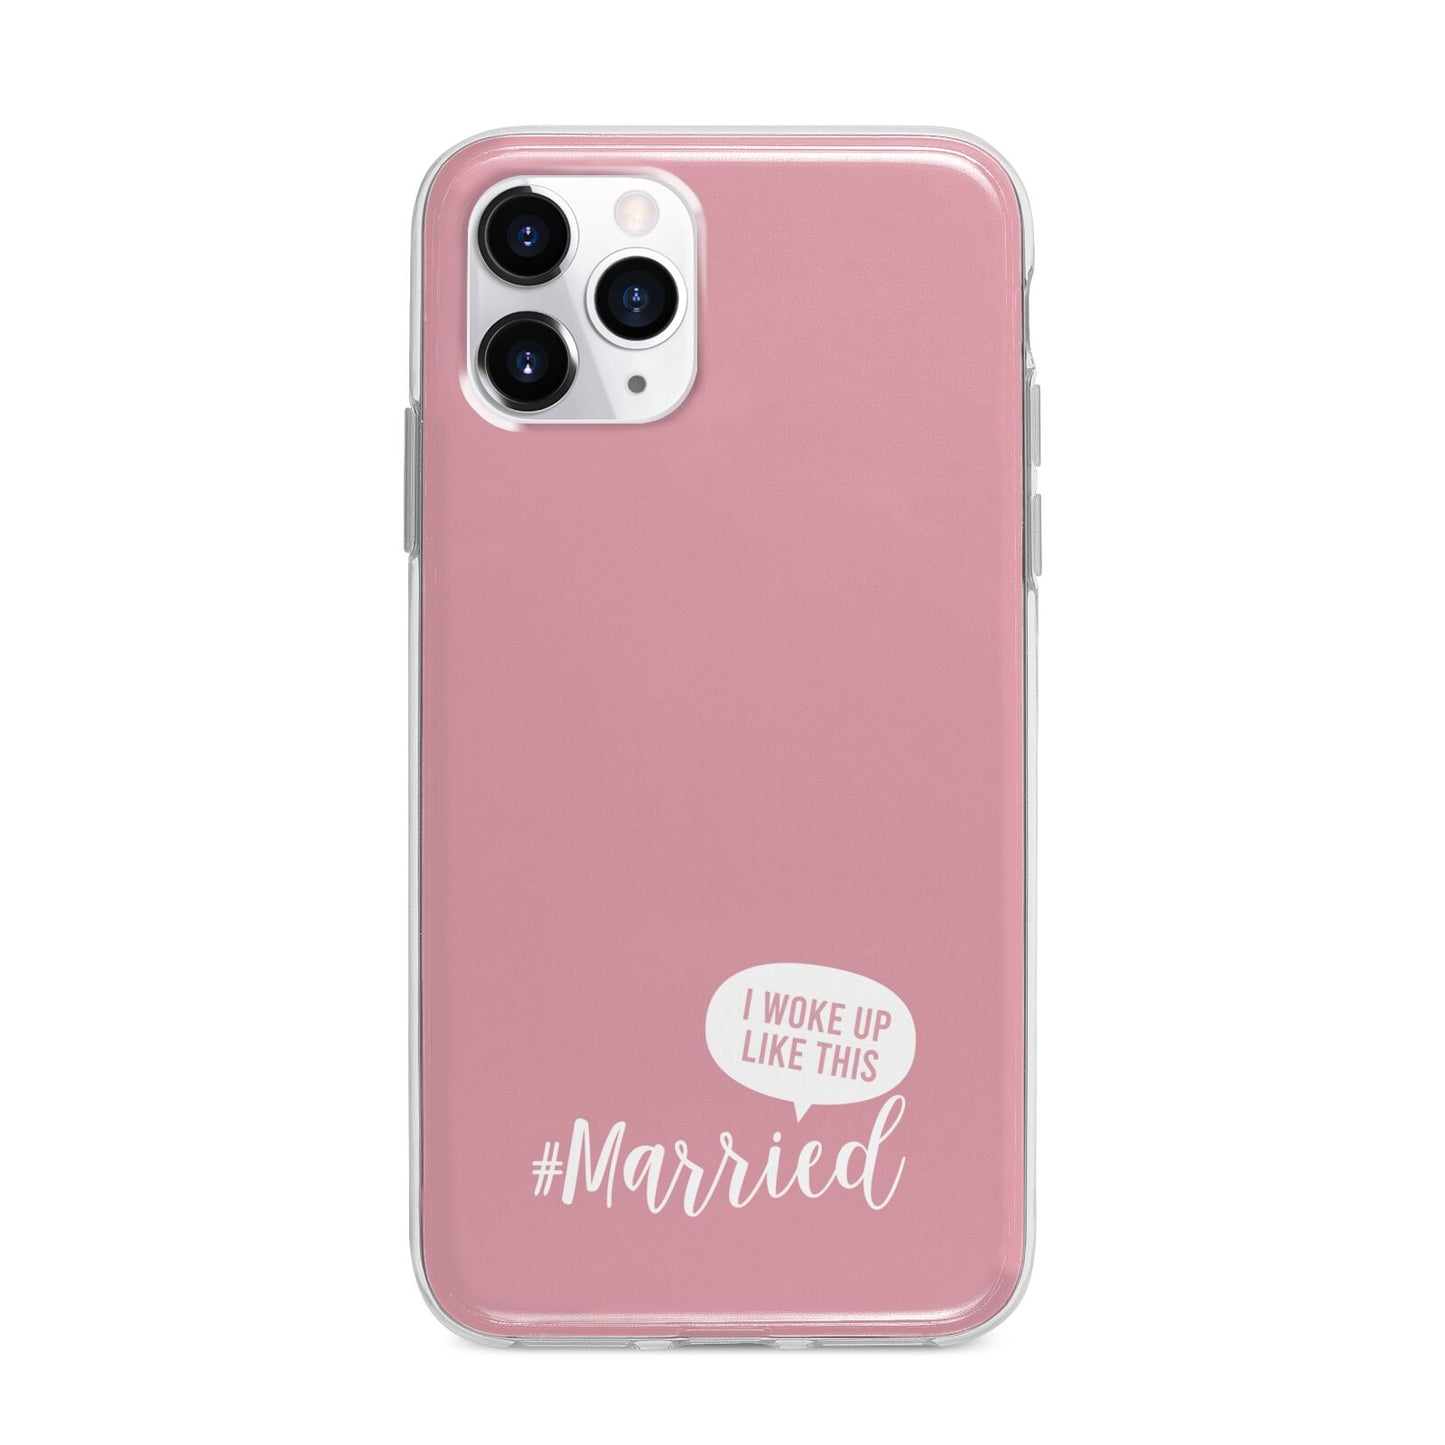 I Woke Up Like This Married Apple iPhone 11 Pro Max in Silver with Bumper Case